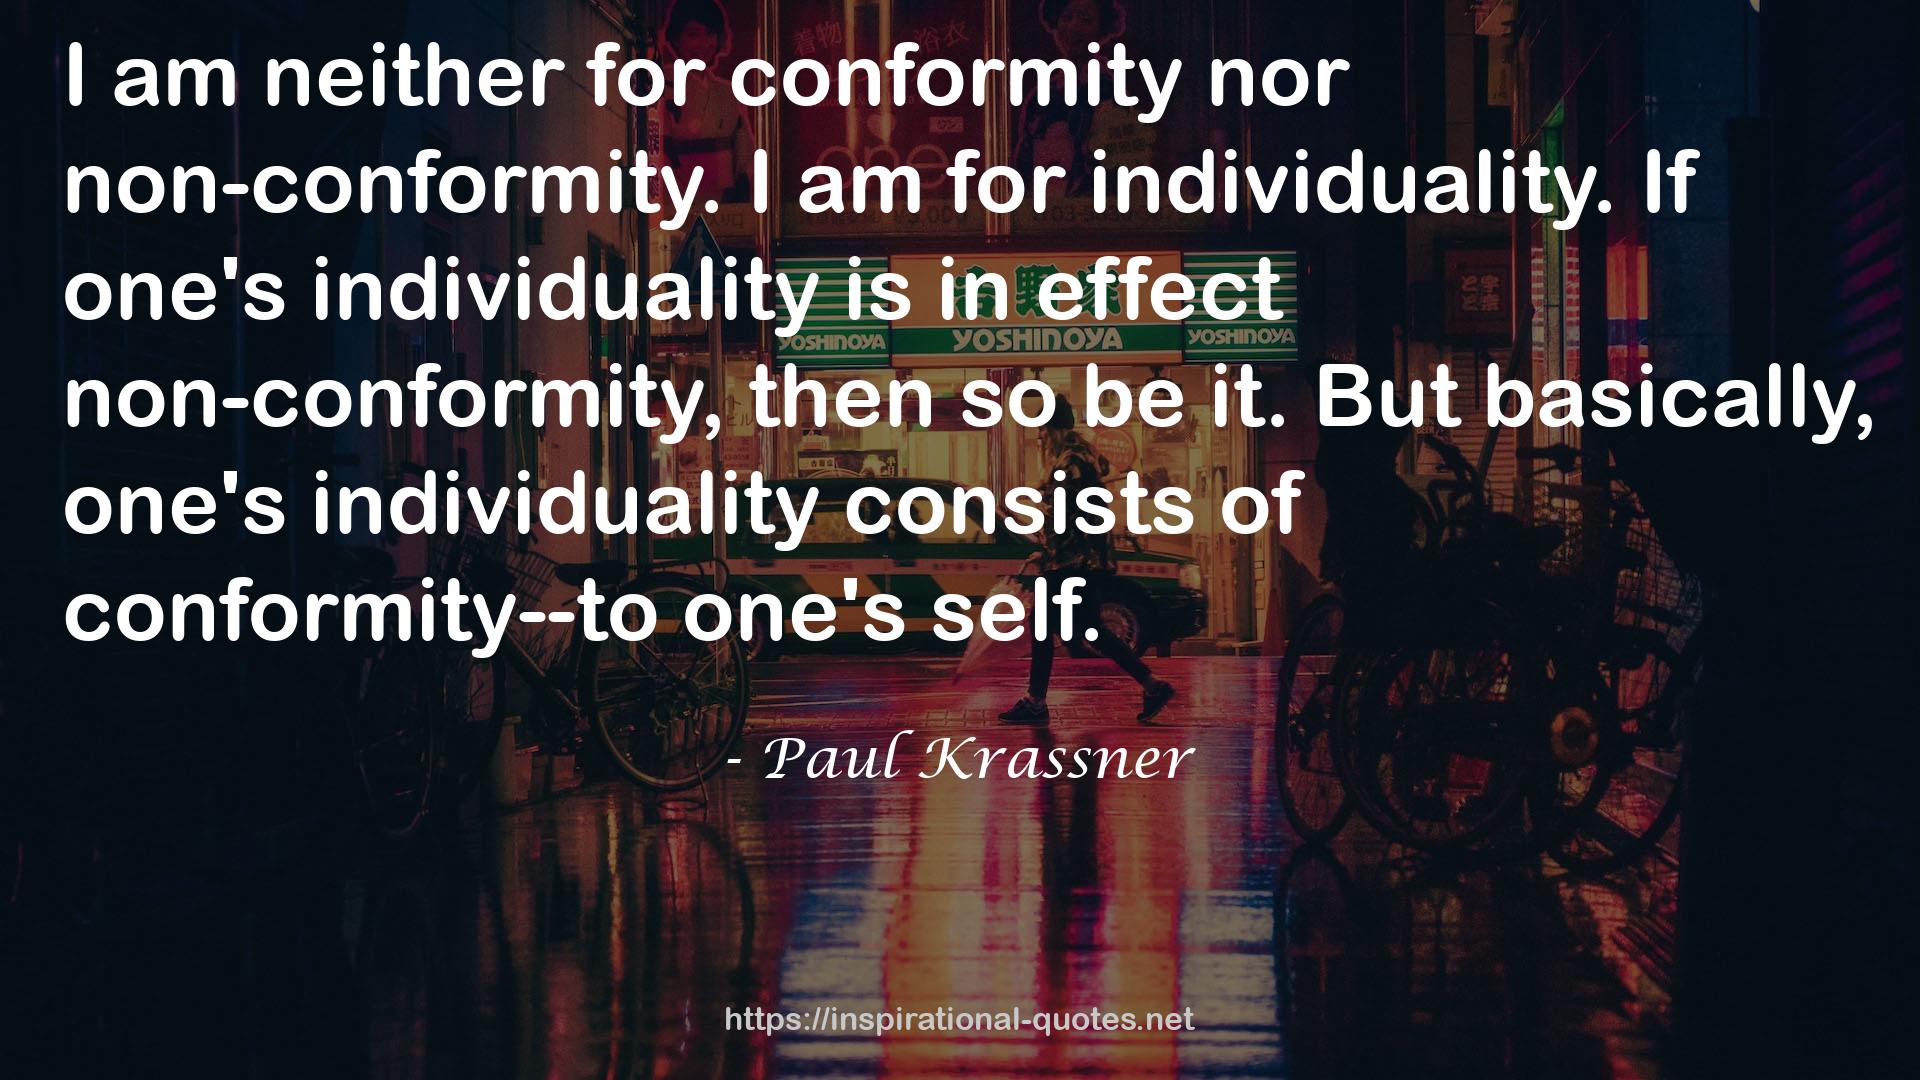 one's individuality  QUOTES